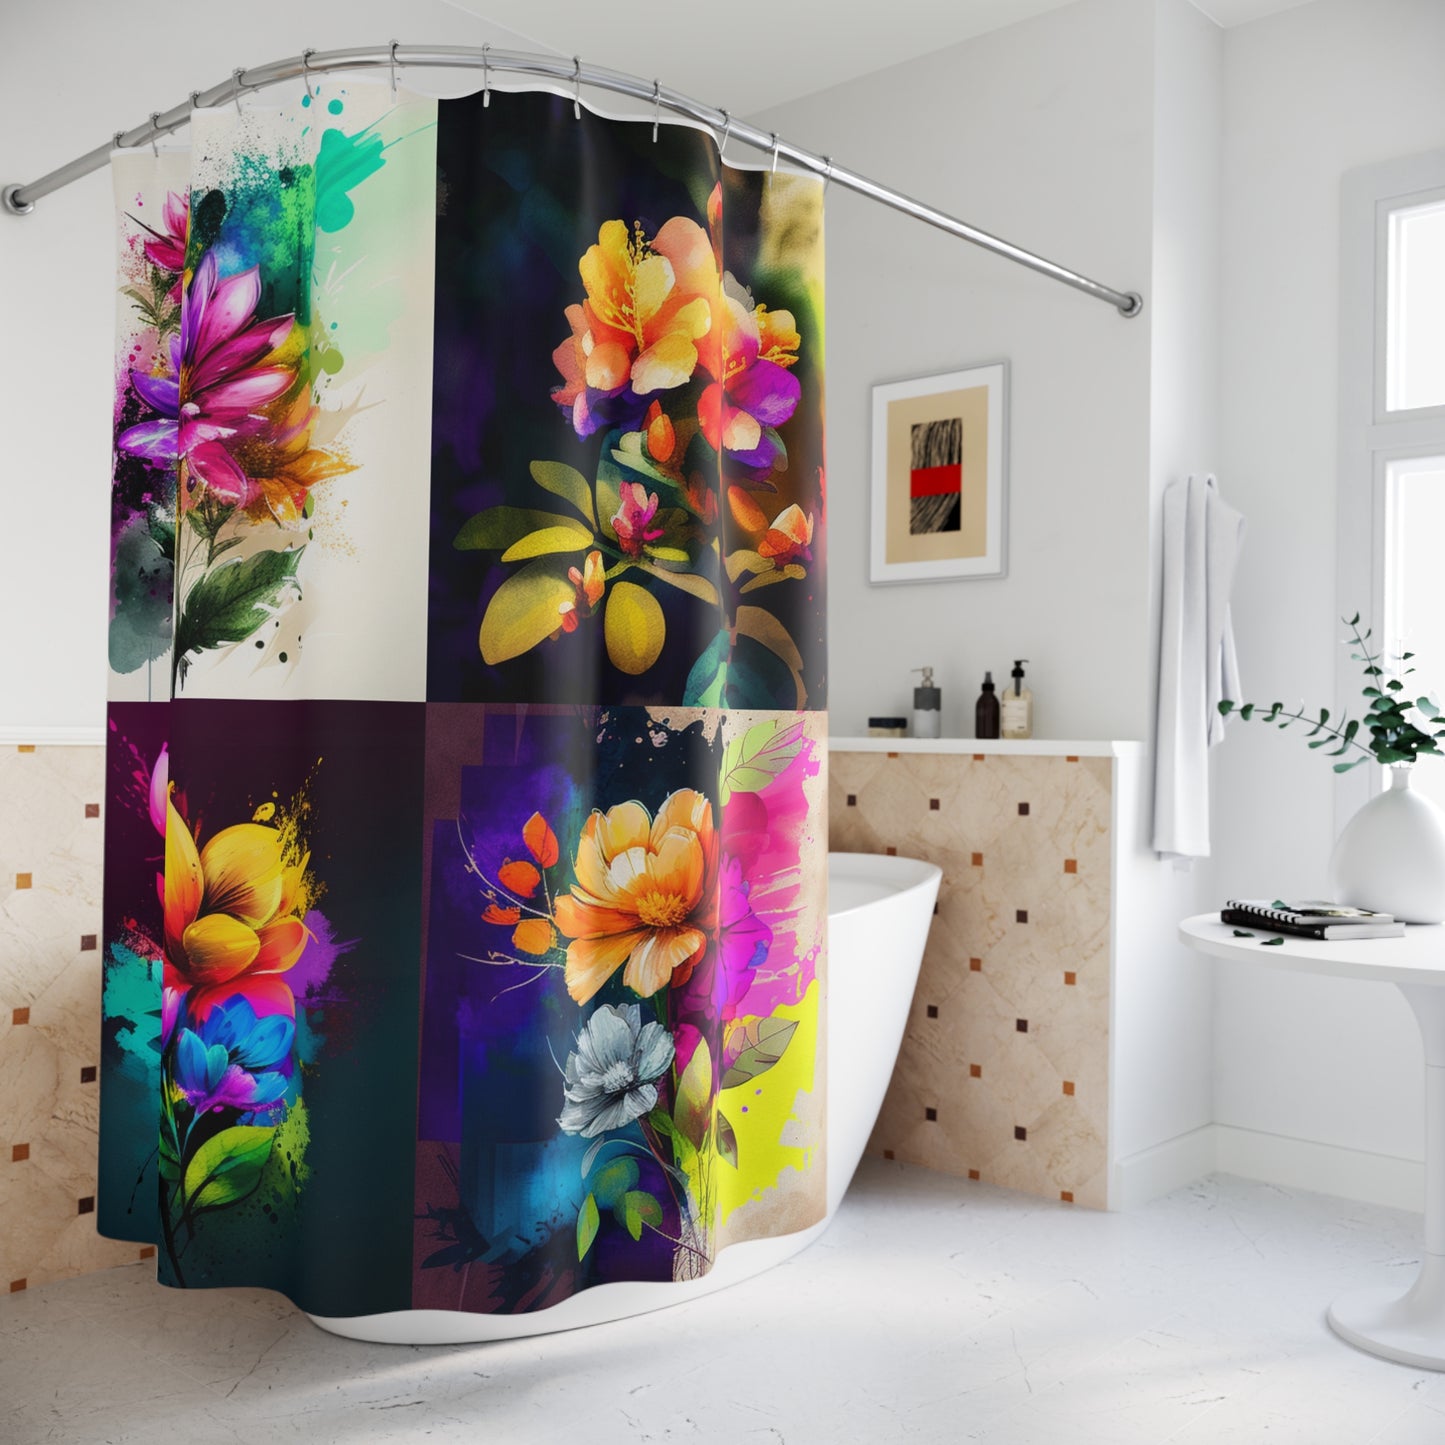 Polyester Shower Curtain bright spring flowers 4 pack